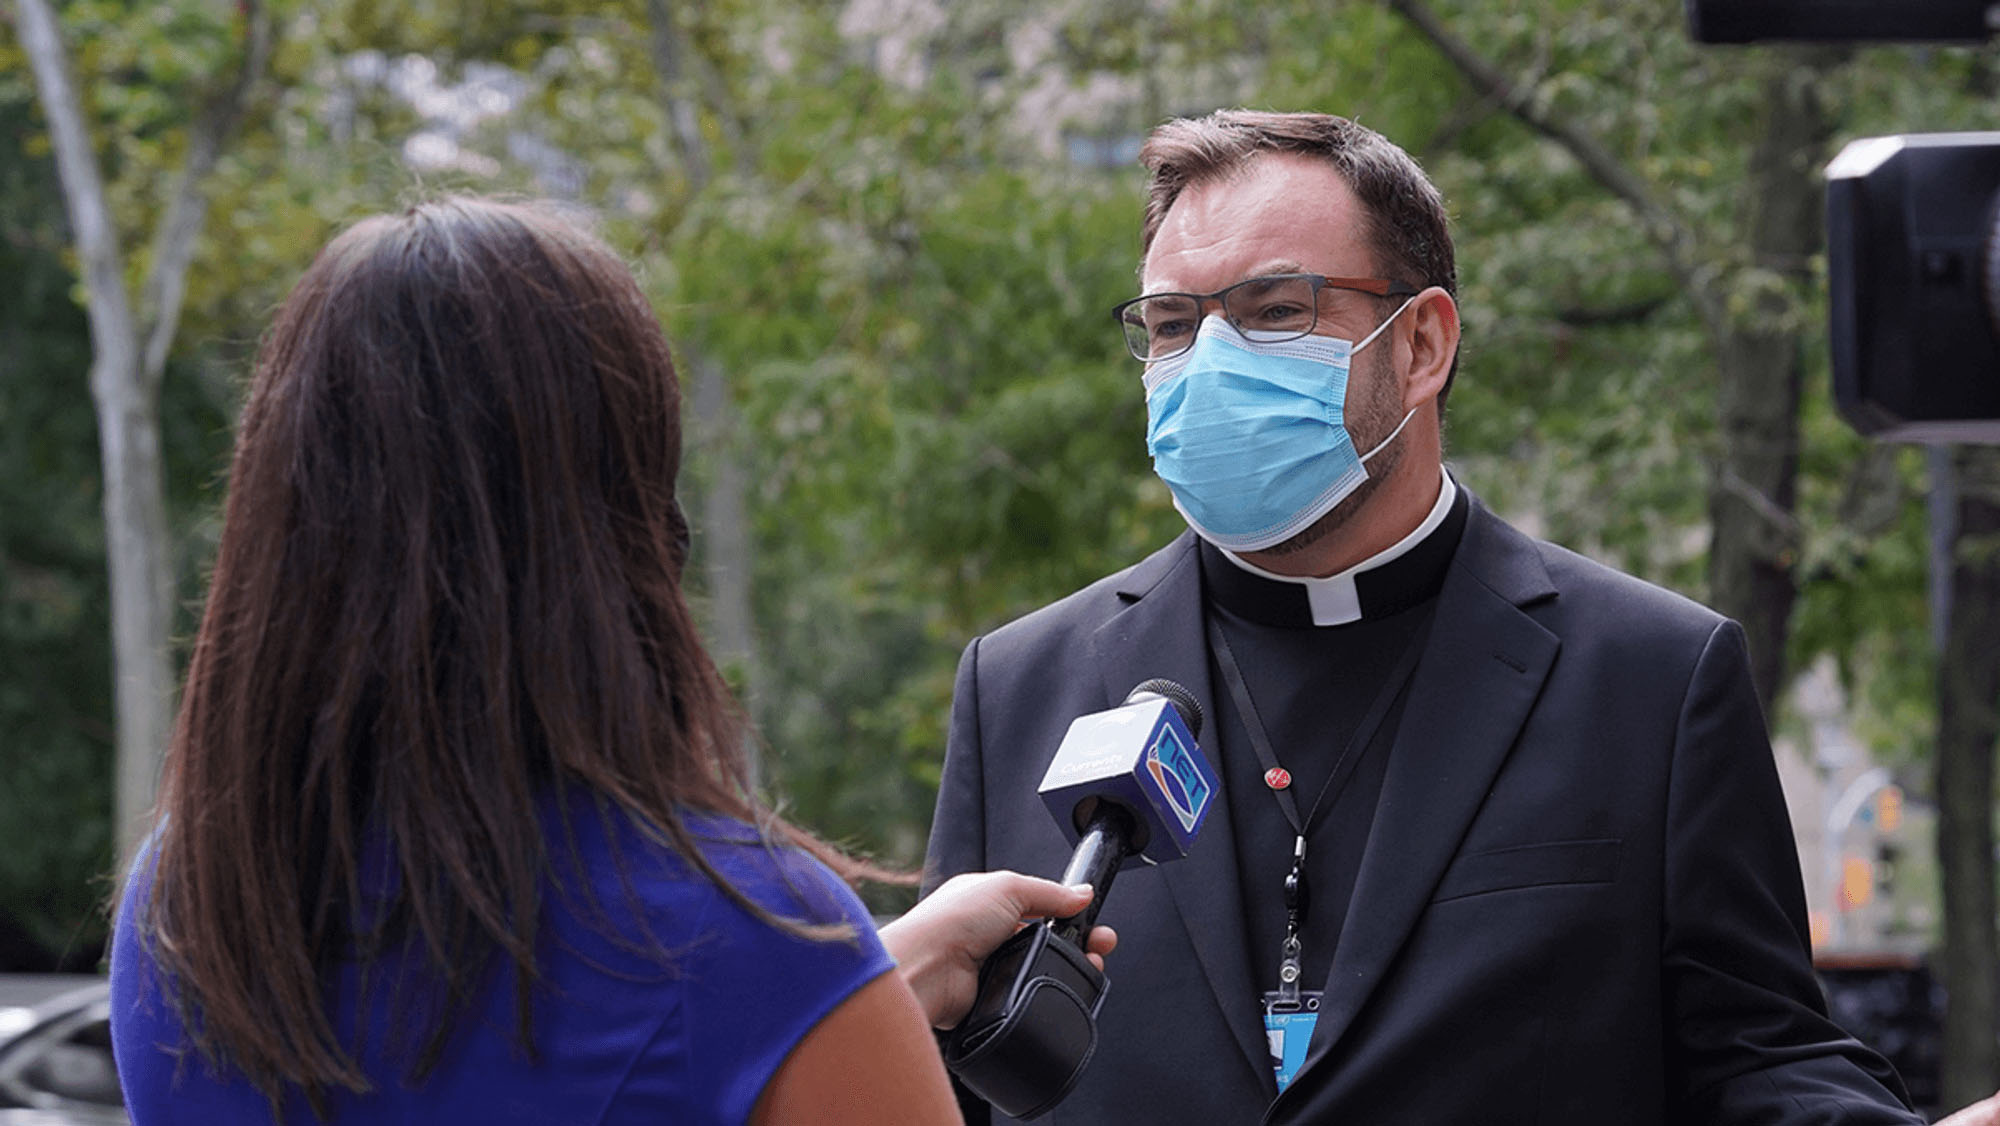 News reporter interviewing a clergyman who is wearing a mask